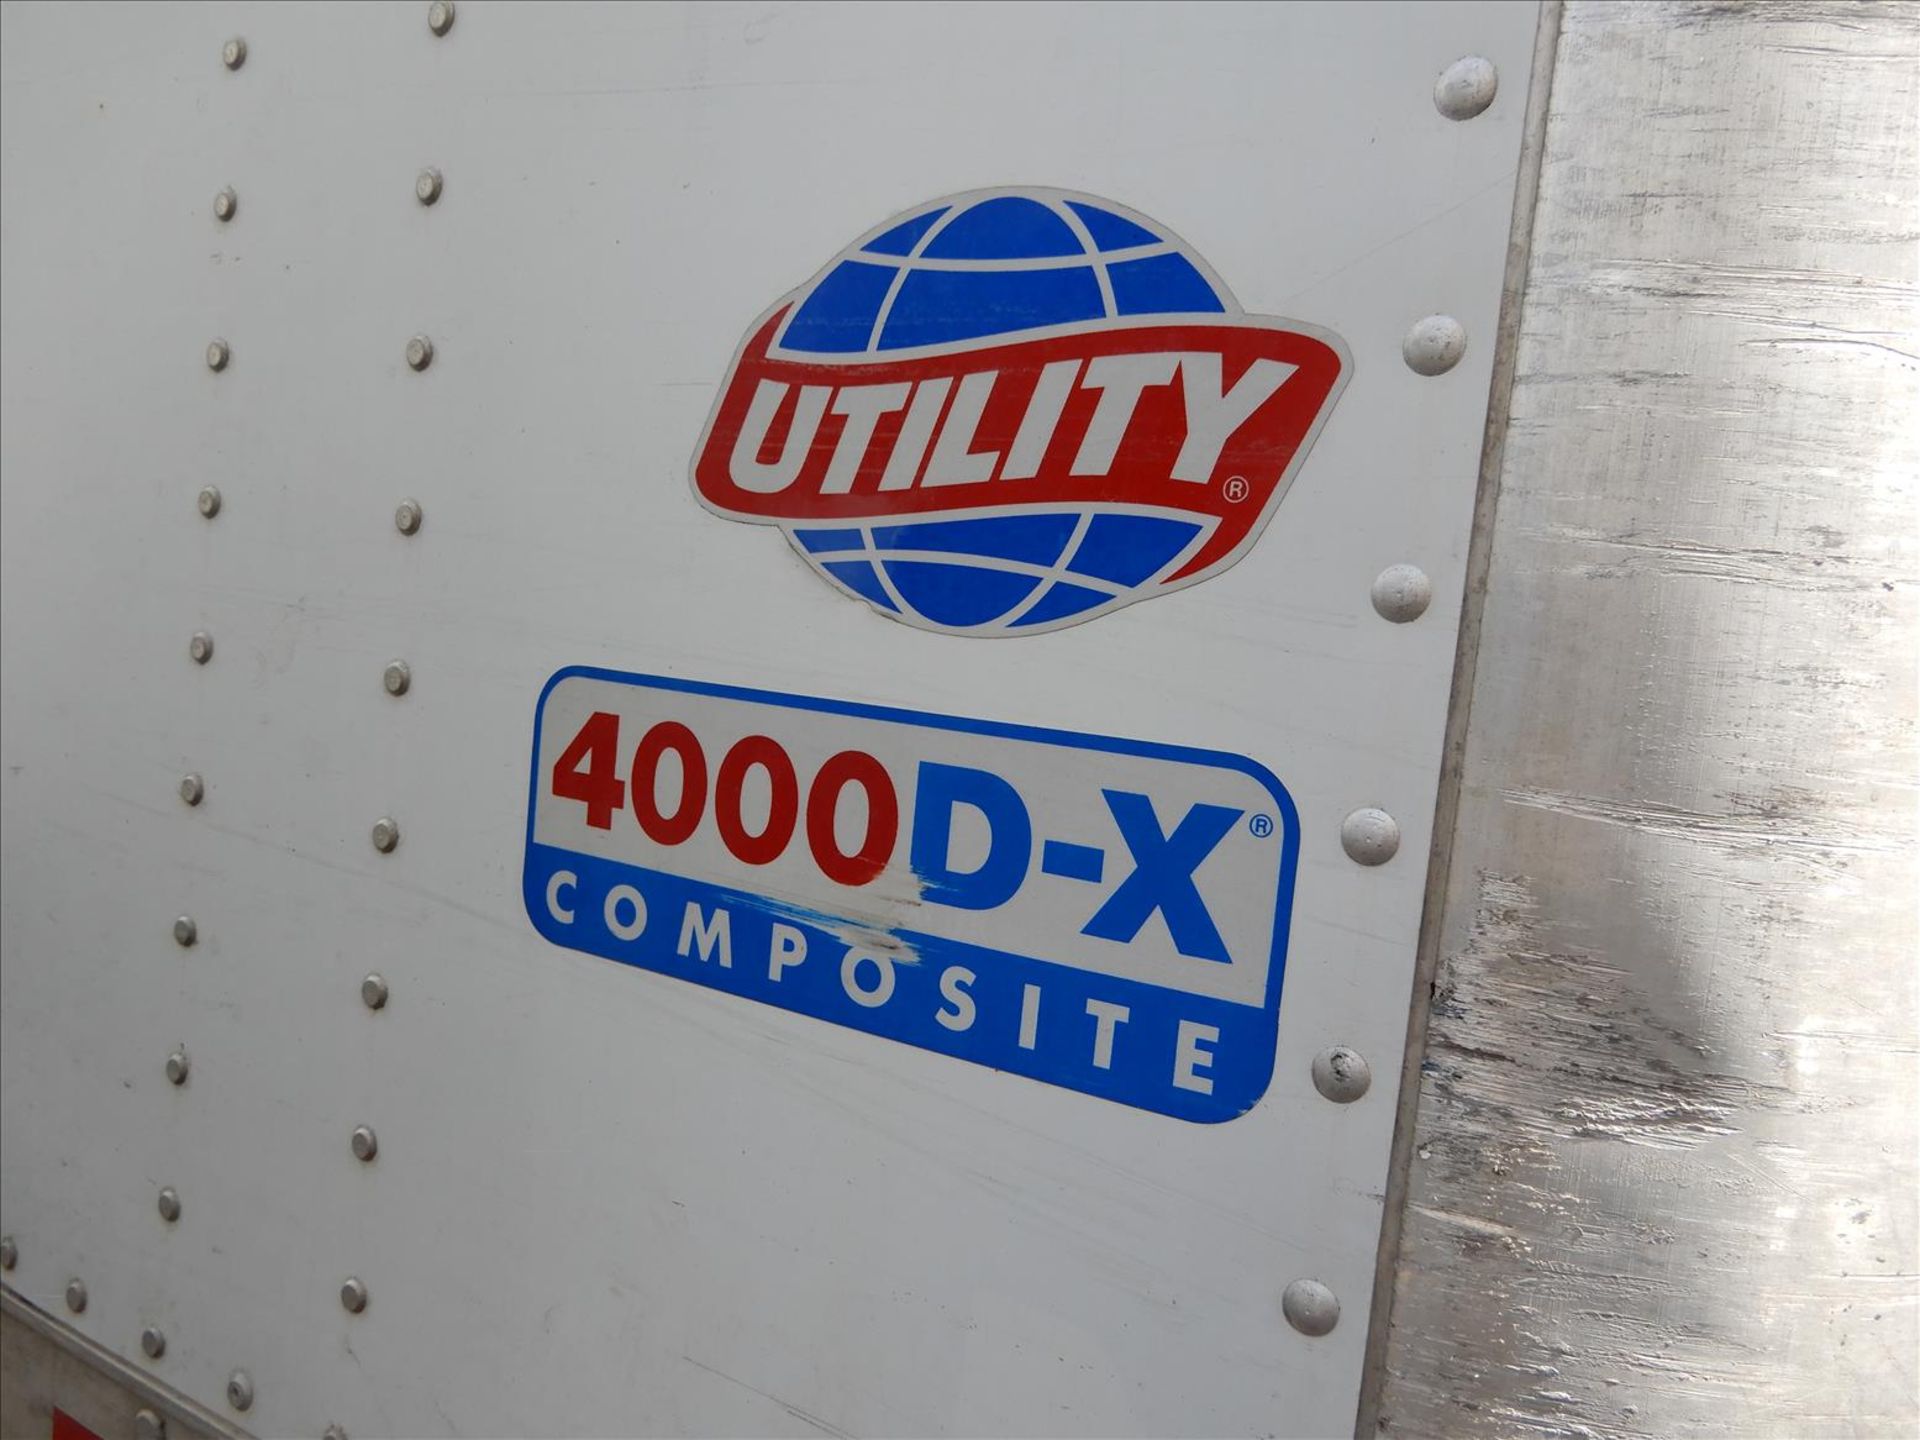 2010 Utility Trailer - Located in Indianapolis, IN - Image 7 of 36